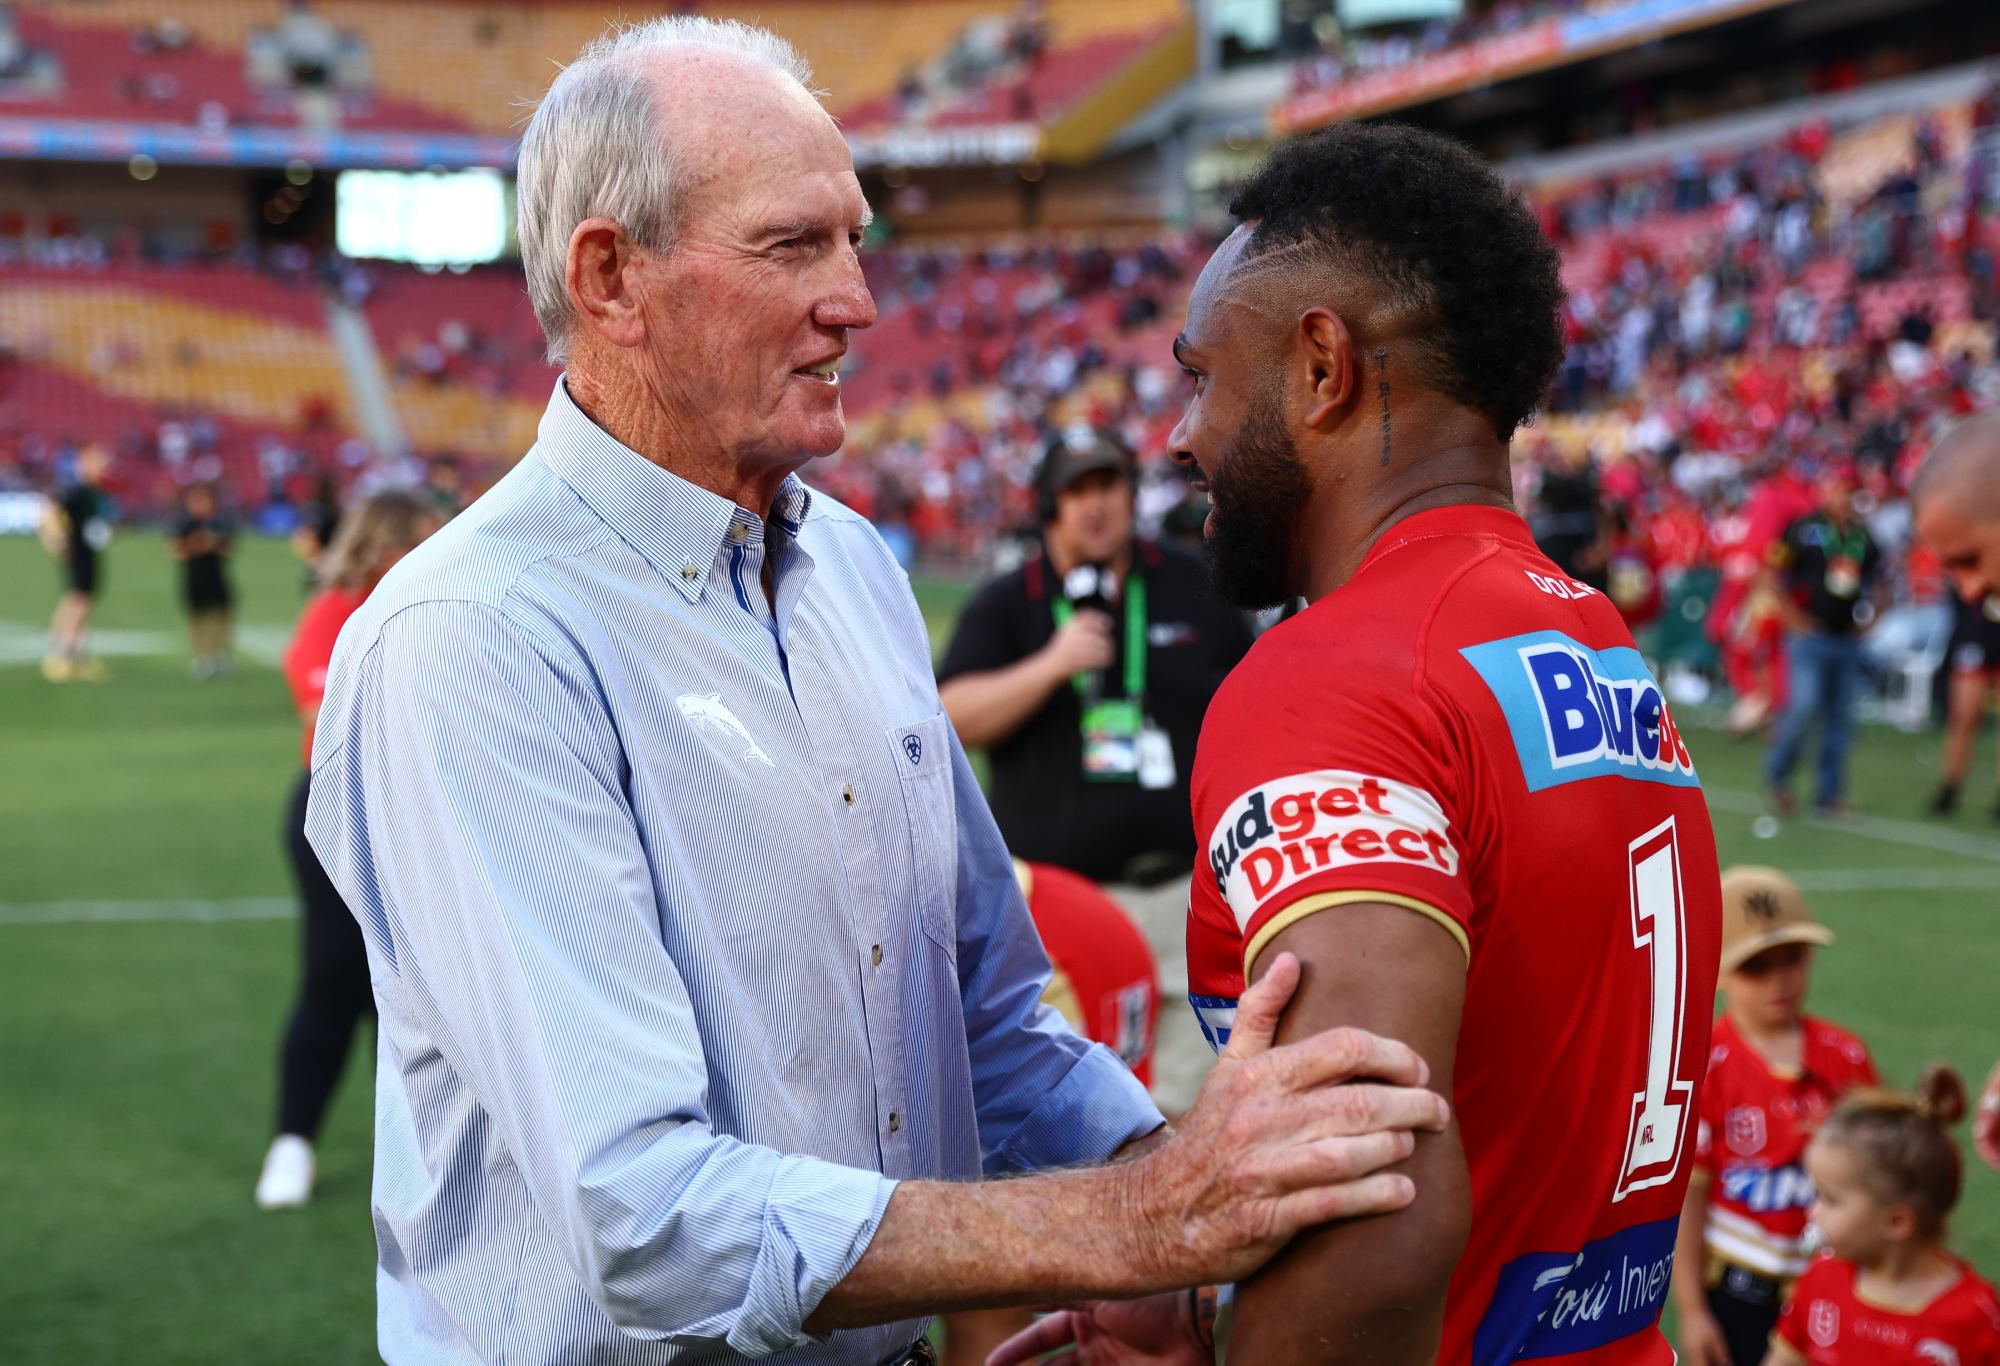 BRISBANE, AUSTRALIA - MARCH 05: Dolphins coach Wayne Bennett with players after the round one NRL match between the Dolphins and Sydney Roosters at Suncorp Stadium on March 05, 2023 in Brisbane, Australia. (Photo by Chris Hyde/Getty Images)